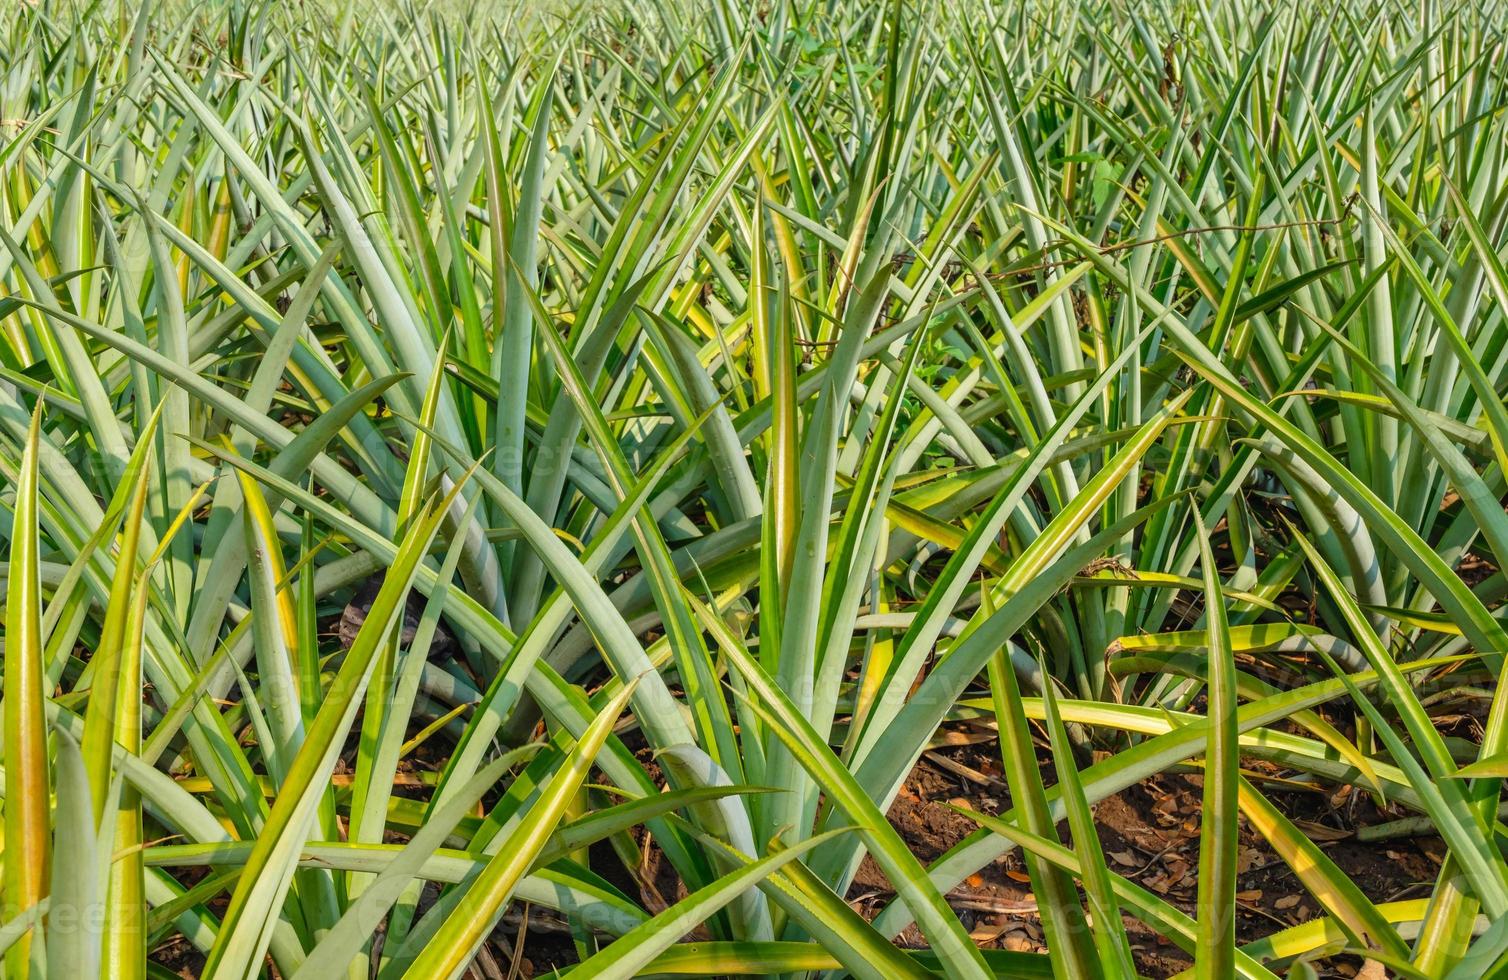 Pineapples in a pineapple field near harvest. photo